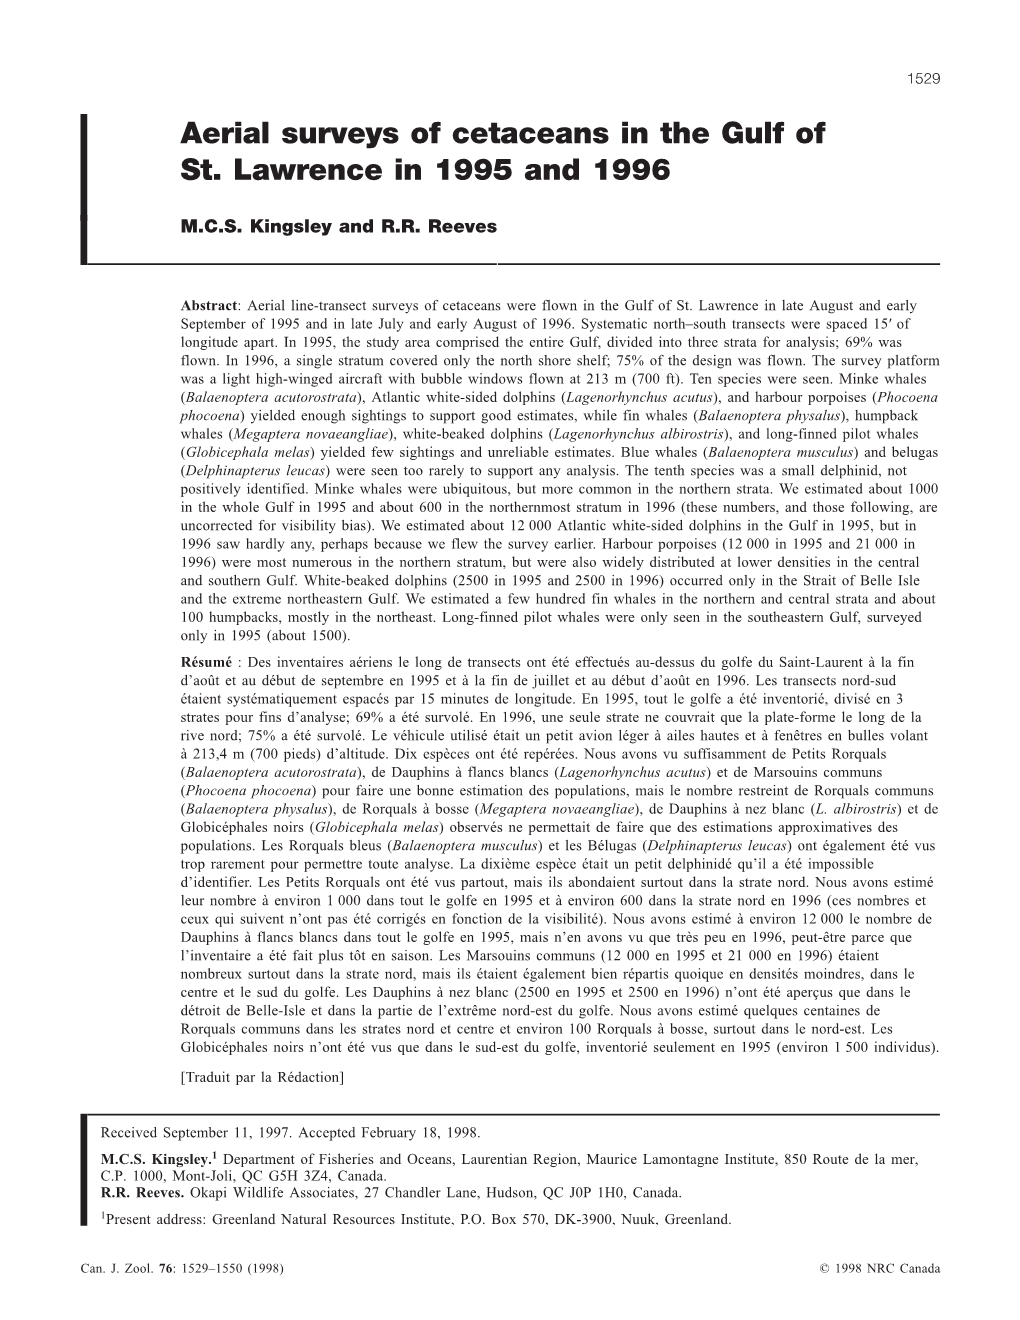 Aerial Surveys of Cetaceans in the Gulf of St. Lawrence in 1995 and 1996